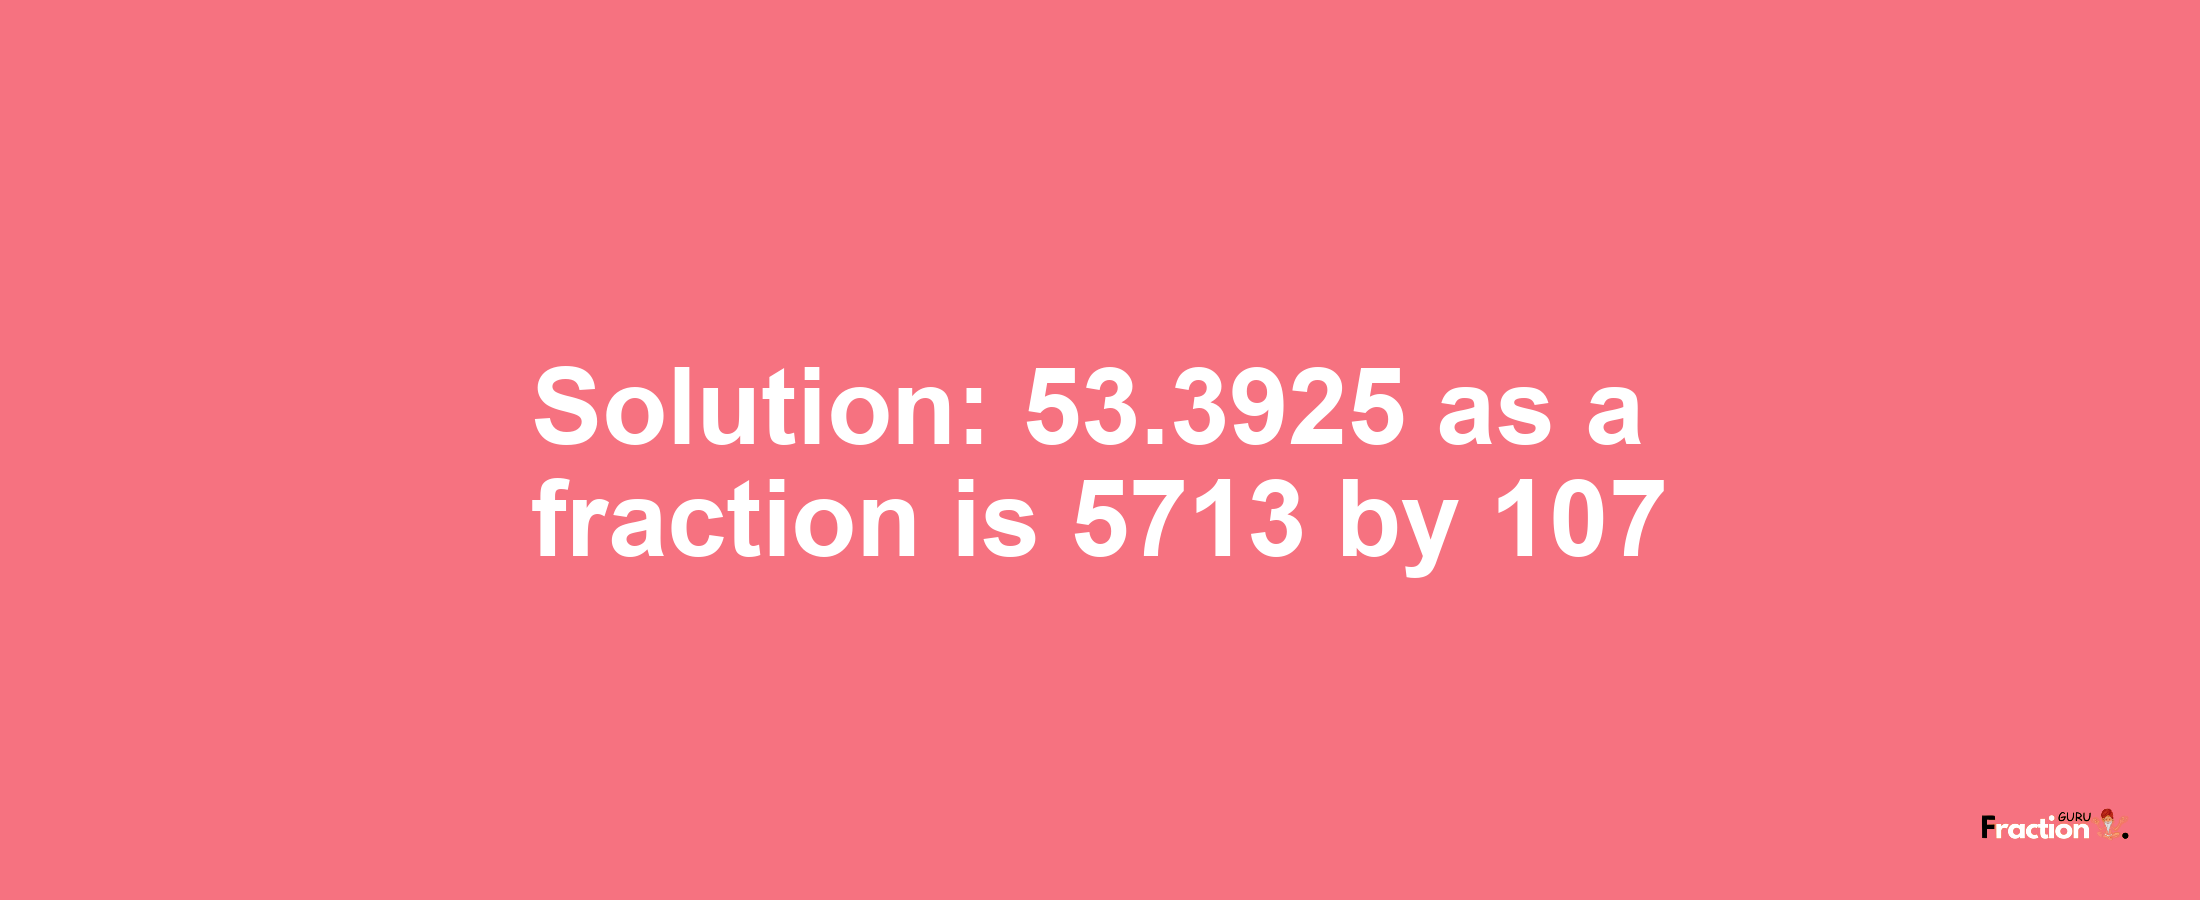 Solution:53.3925 as a fraction is 5713/107